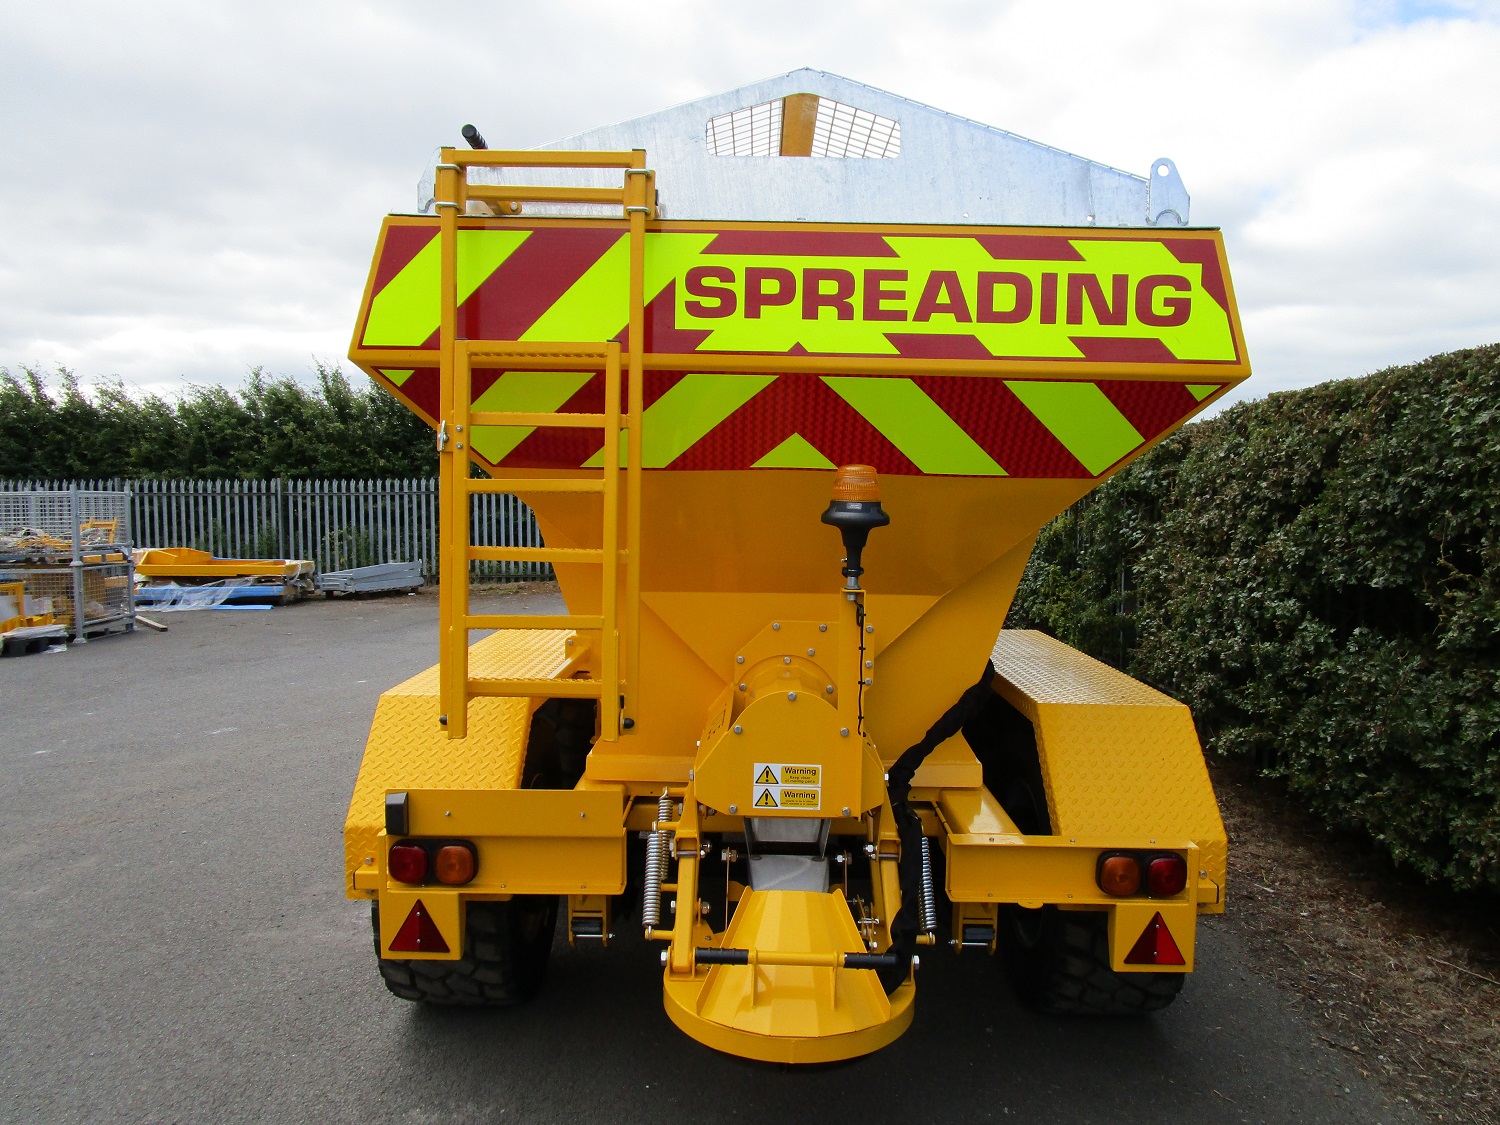 Tractor Towed Salt Spreader (Gritter) VALE TS6000 - Full road lighting with high quality rubberized lighting components to resist salt corrosion